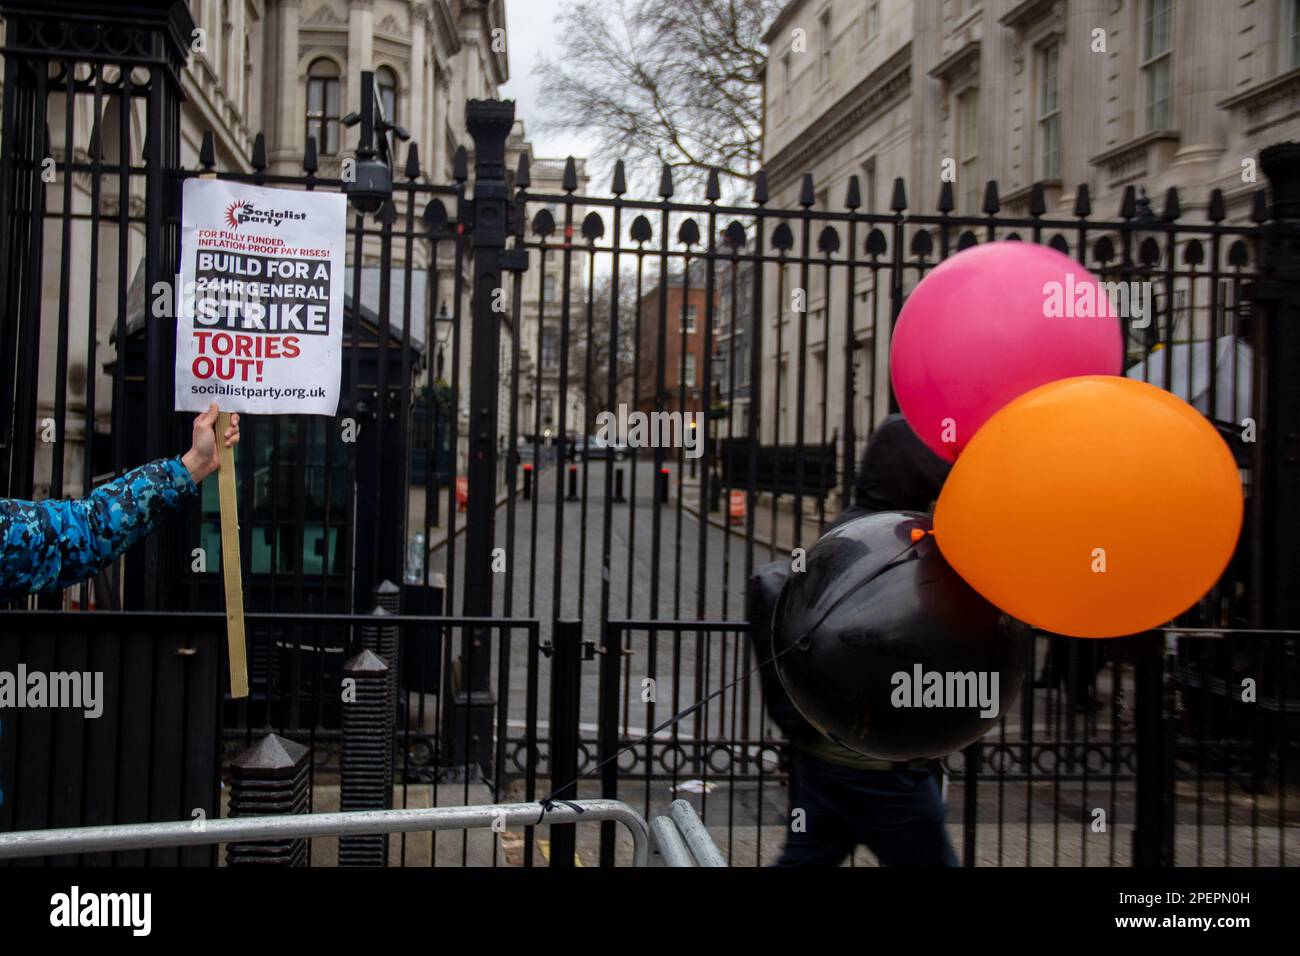 London, UK. 15th Mar, 2023. London, UK - March 15, 2023: On Budget Day, amid a 24-hour general strike involving numerous unions and workers, a socialist protester stood in front of Downing Street. Credit: Sinai Noor/Alamy Live News Stock Photo